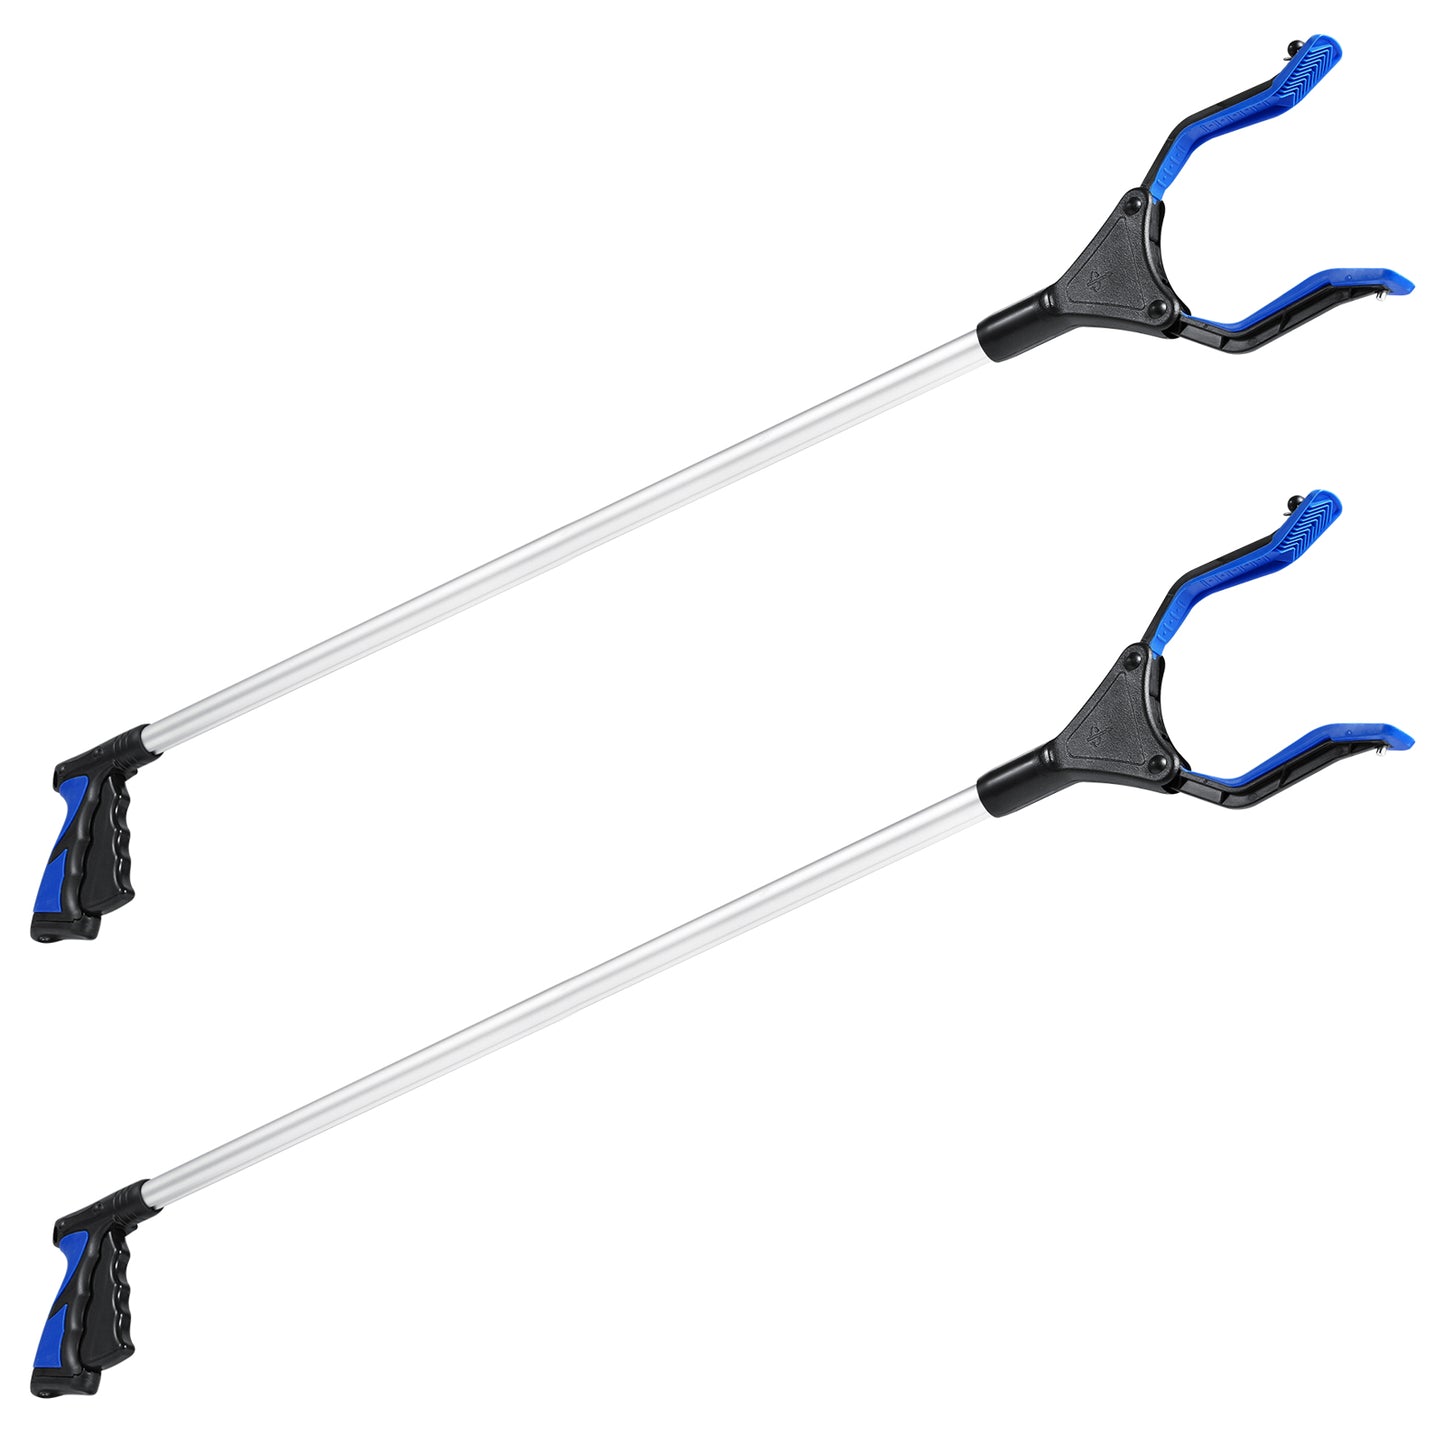 Rirether 2-Pack 36 Inch Grabber Tool for Elderly, Non-Foldable Aluminum Alloy Reacher Grabber with Magnetic Tip and Hook, Rotating Gripper, Wide Jaw Reaching Aid